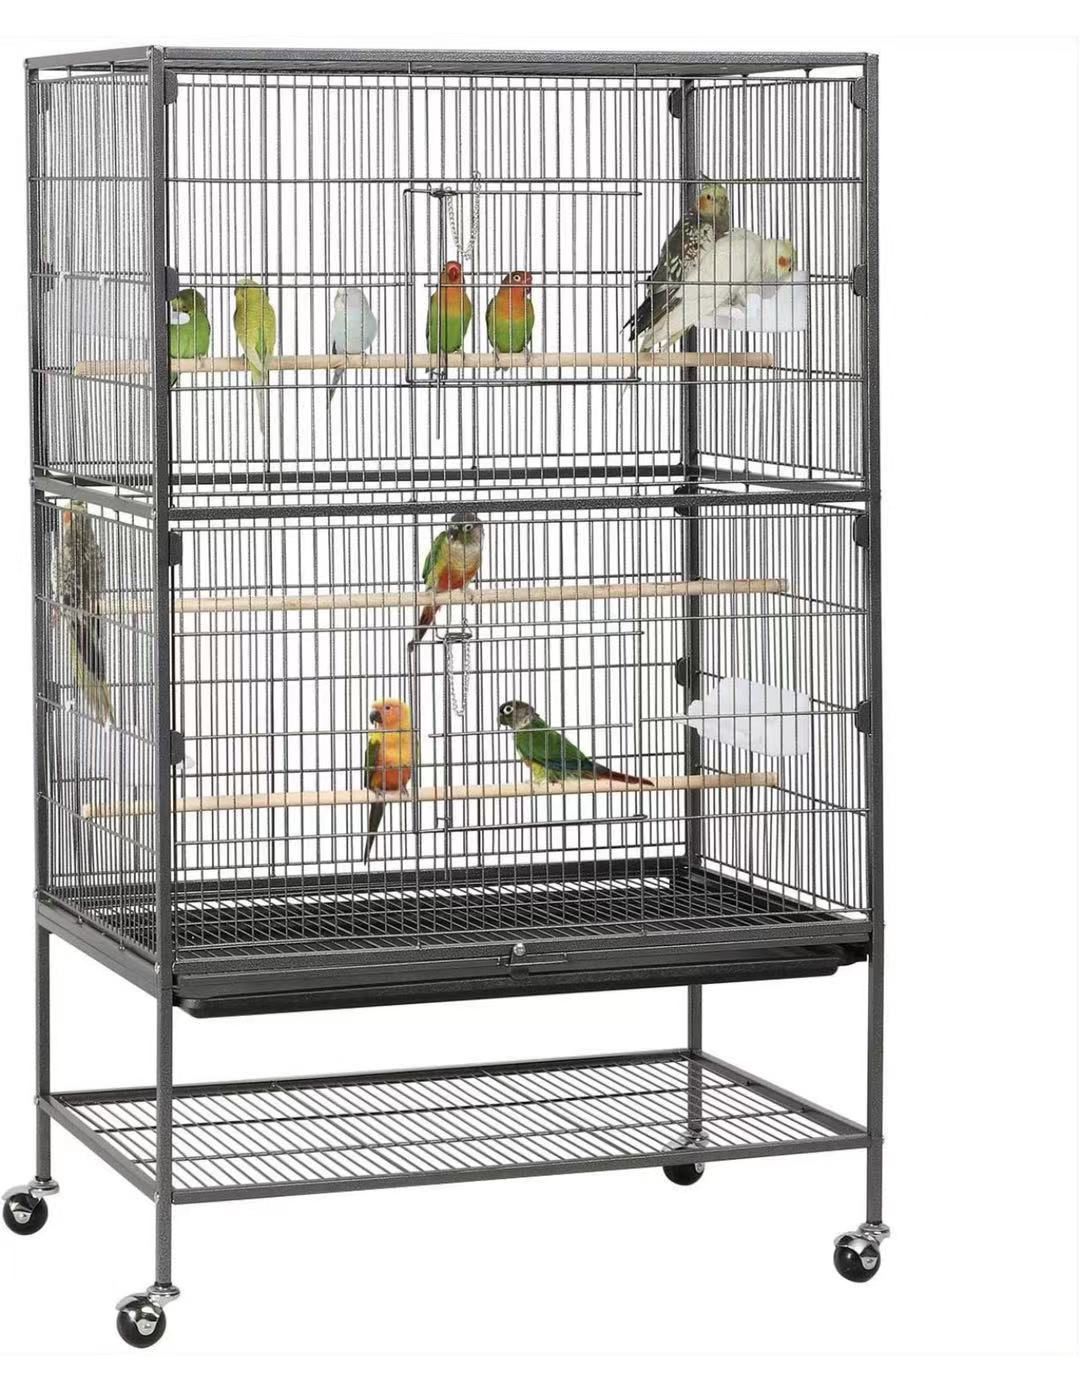 52-inch Wrought Iron Standing Large Flight King Bird Cage for Cockatiels African Grey Quaker Amazon Sun Parakeets Green Cheek Conures Pigeons Parrot B